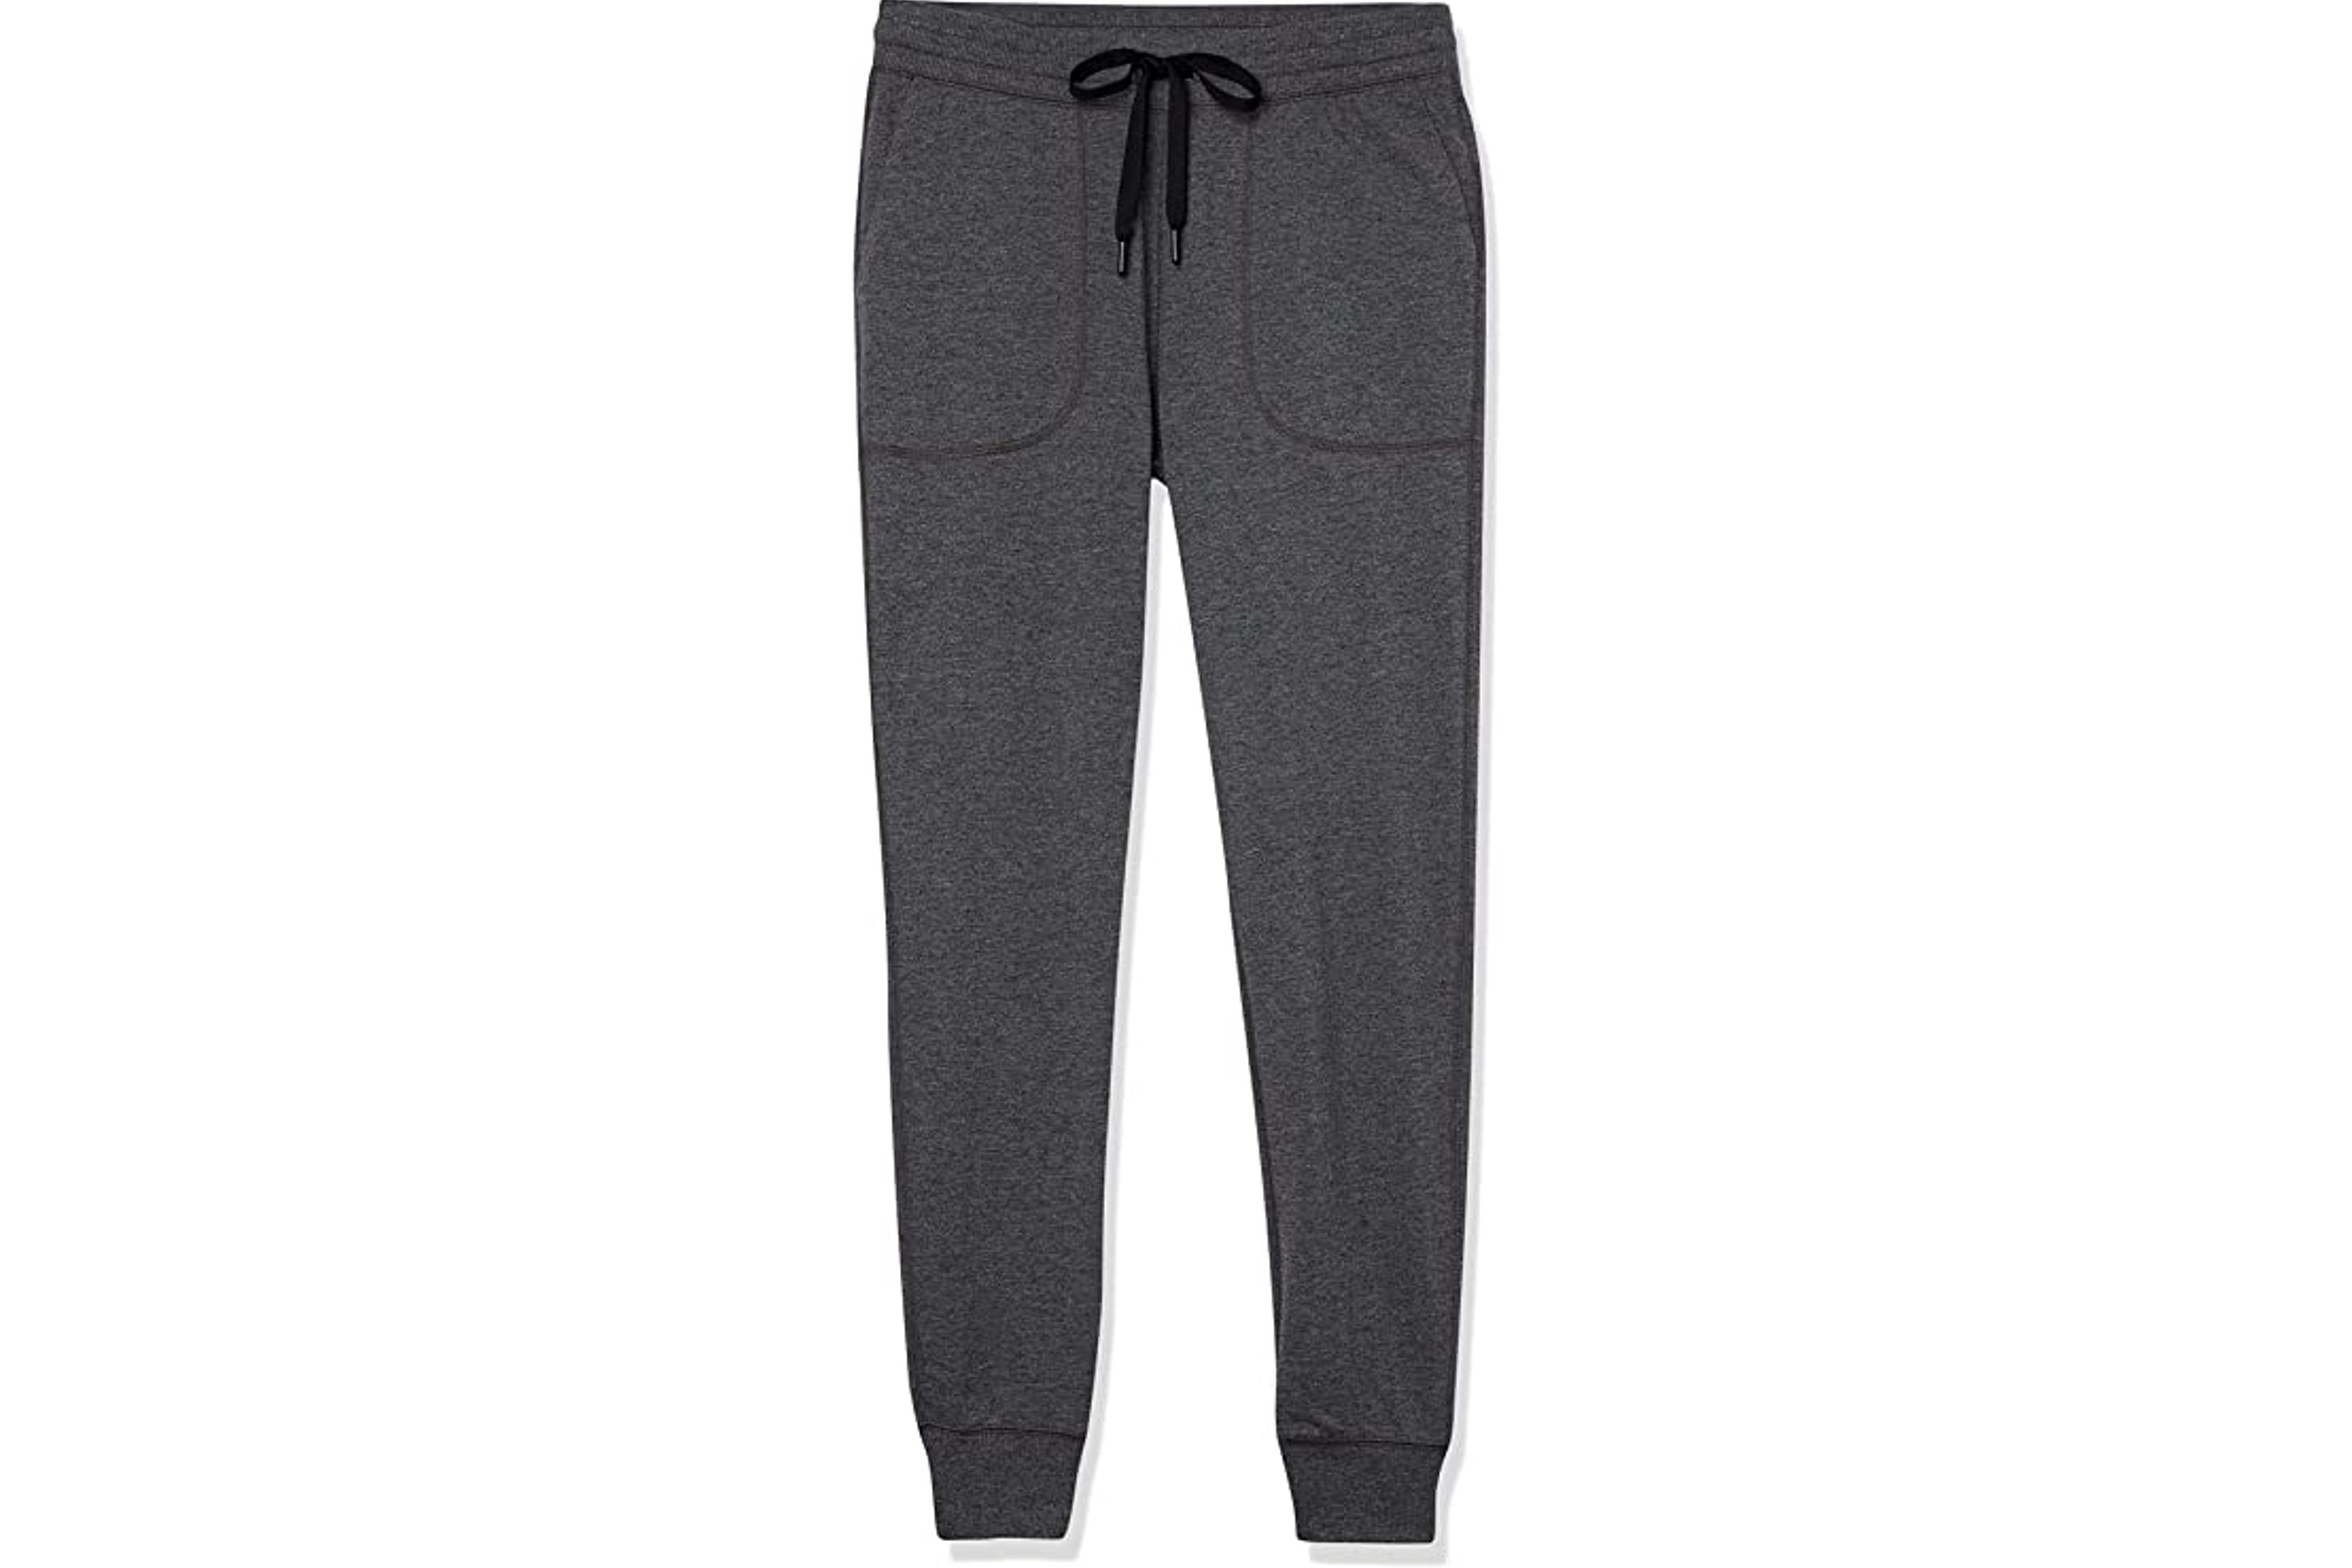 Amazon Essentials Women's Relaxed-Fit Jogger Pant